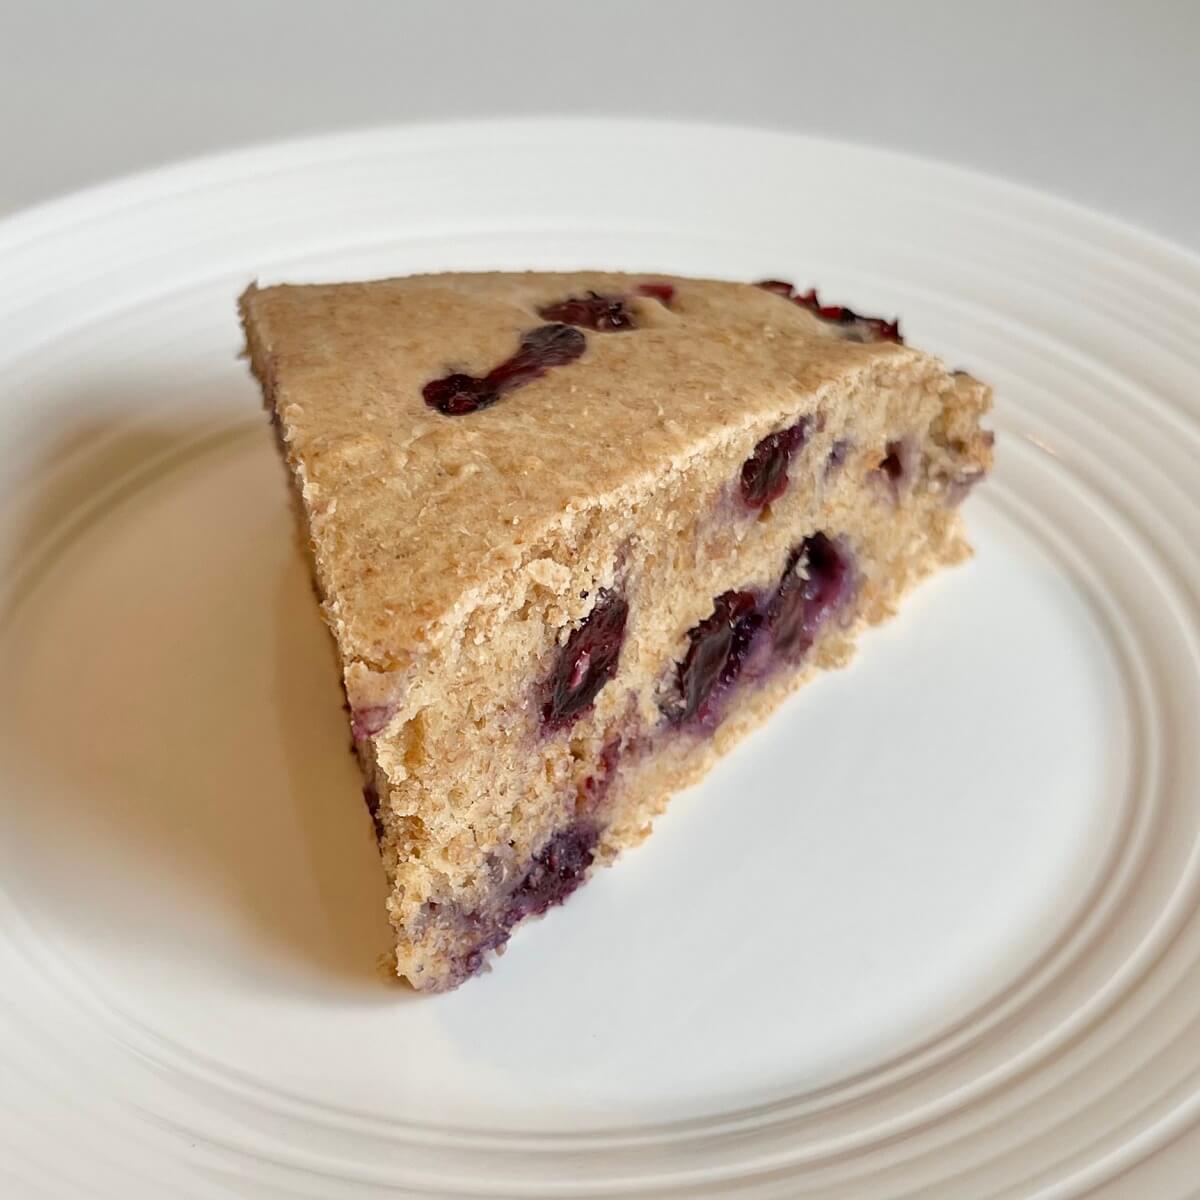 A thick slice of vegan berry cake on a white plate.